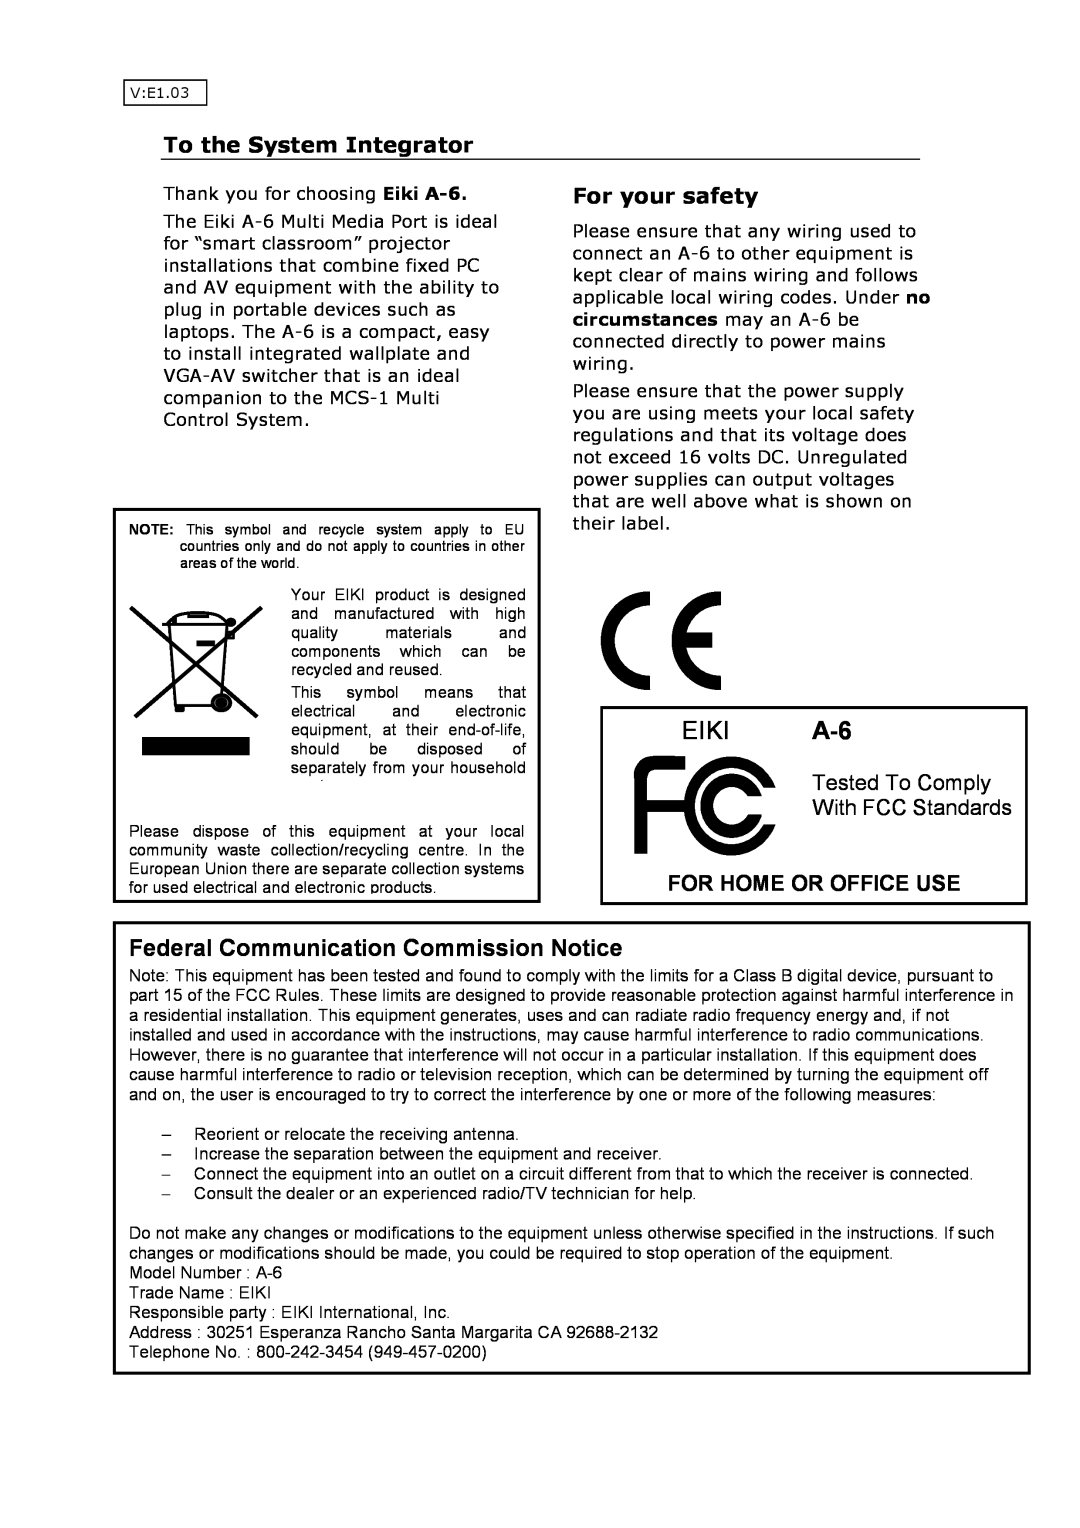 Eiki instruction manual To the System Integrator, For your safety, EIKI A-6, Federal Communication Commission Notice 